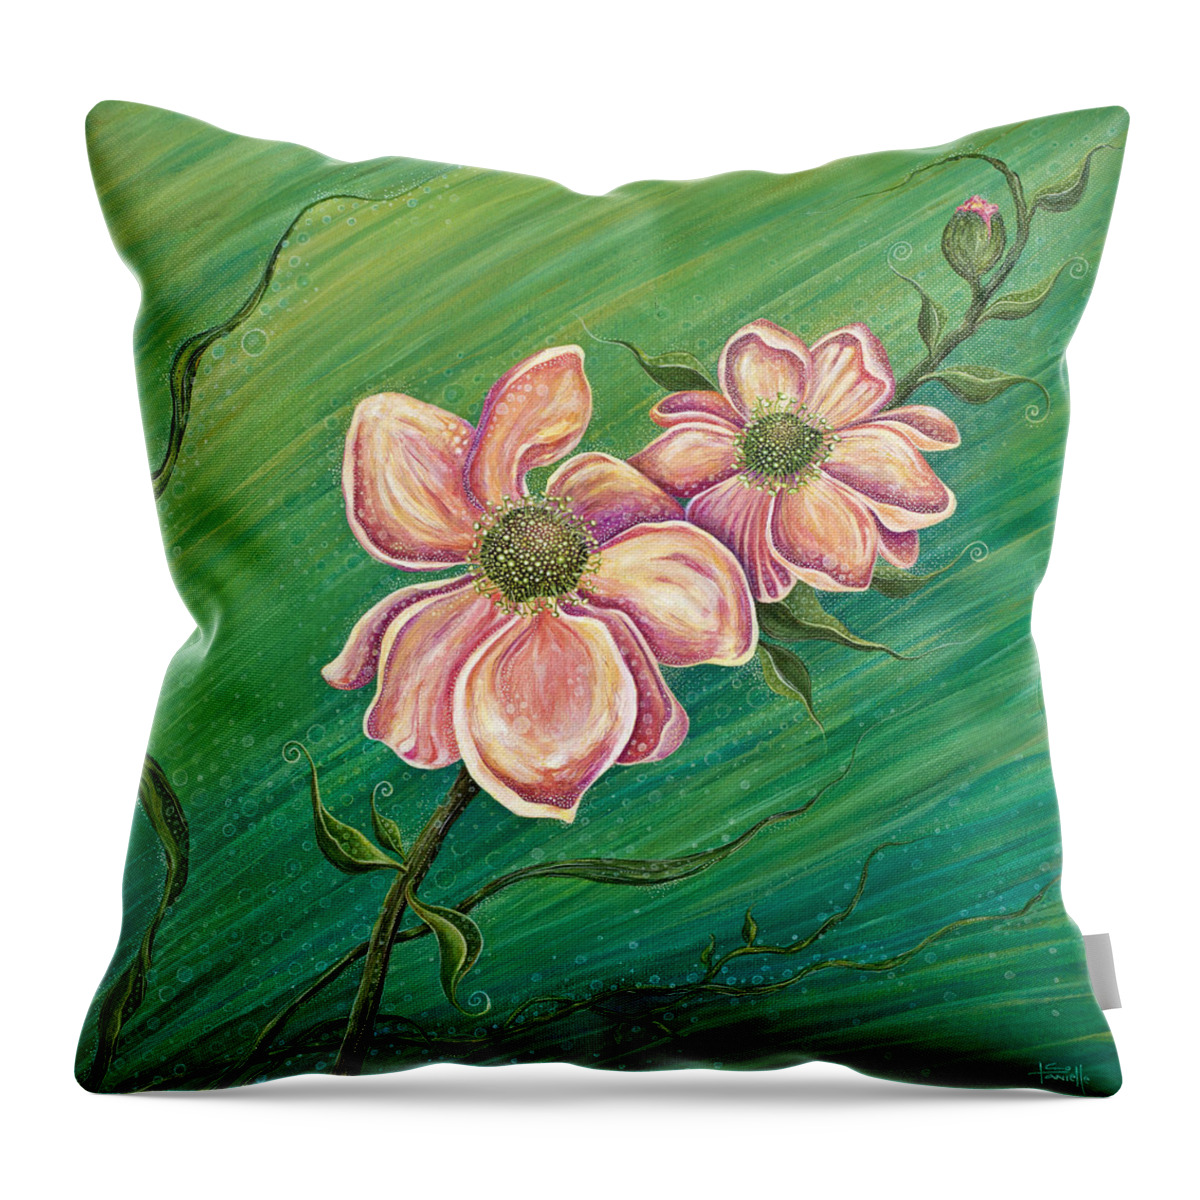 Floral Throw Pillow featuring the painting Remember My Spirit by Tanielle Childers